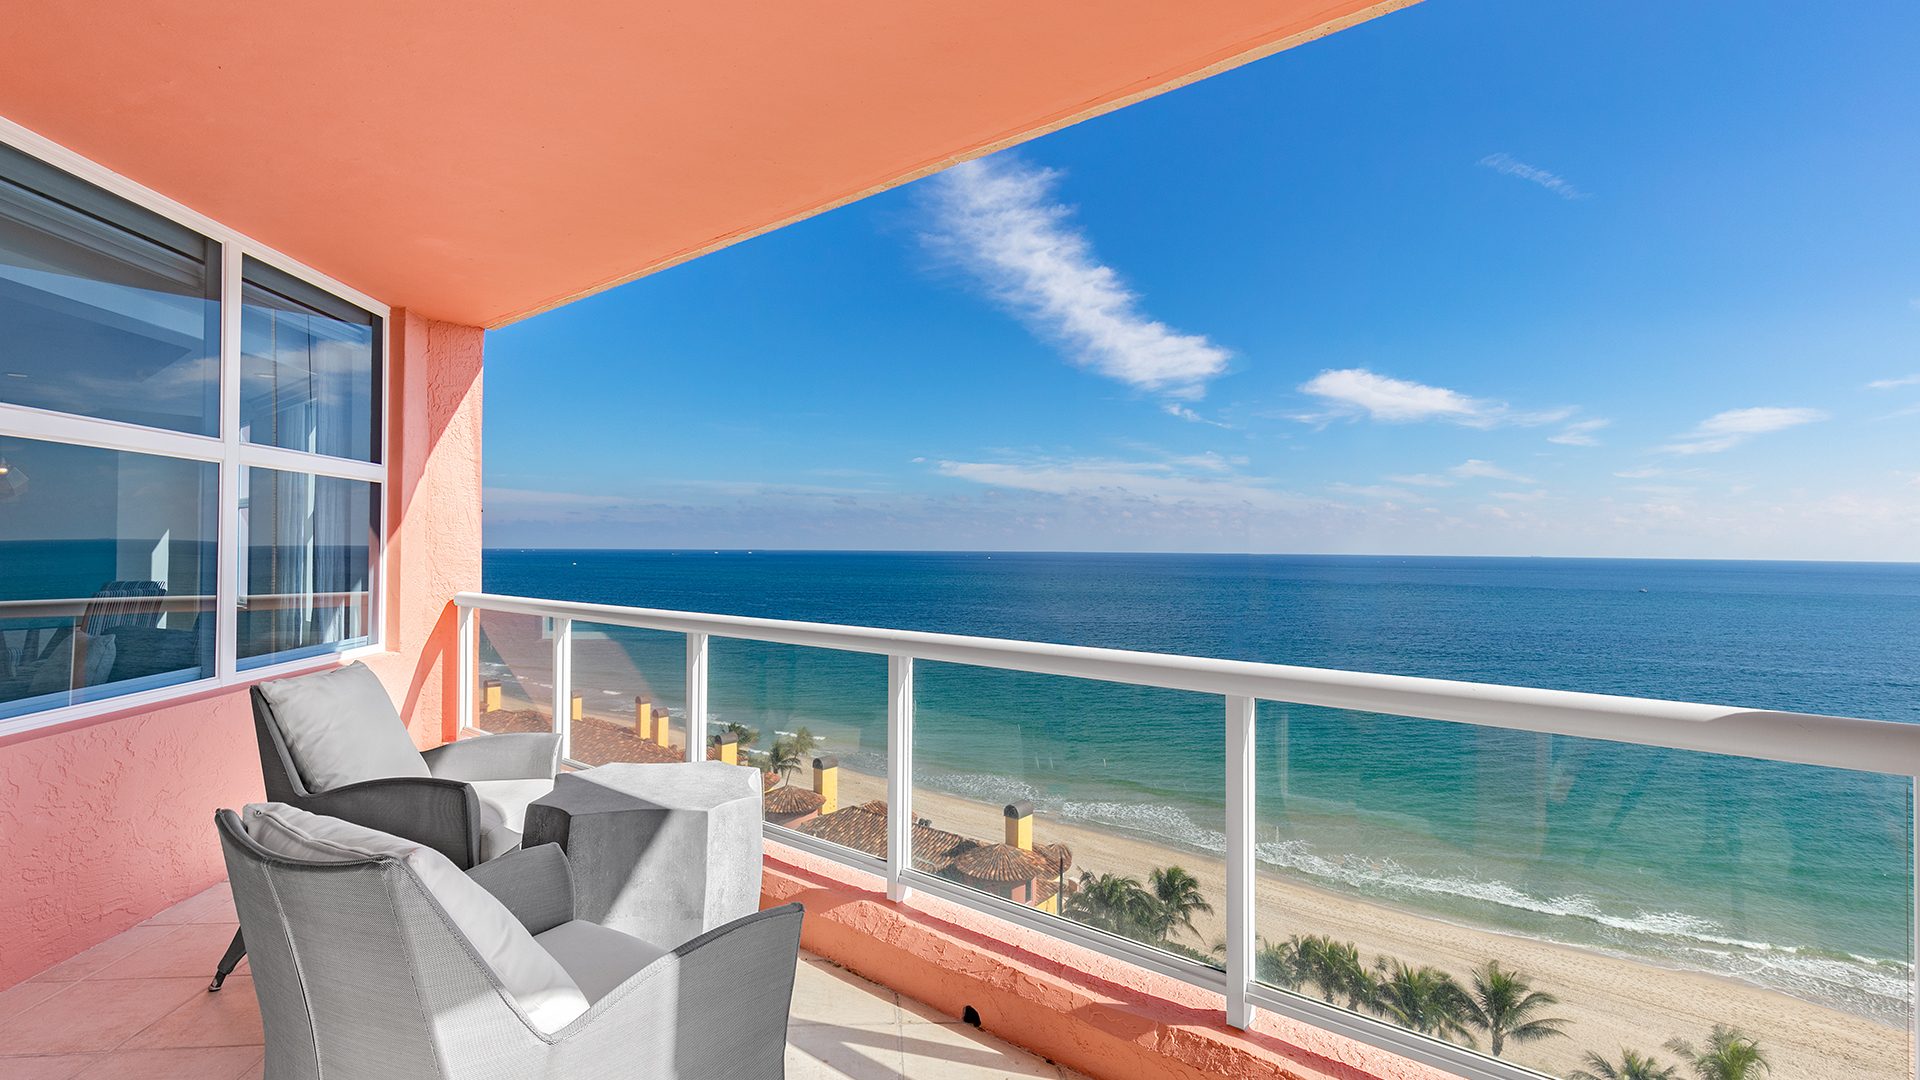 Residence 14E, Tower I at The Palms, Luxury Oceanfront Condominiums in Fort Lauderdale, Florida 33305.